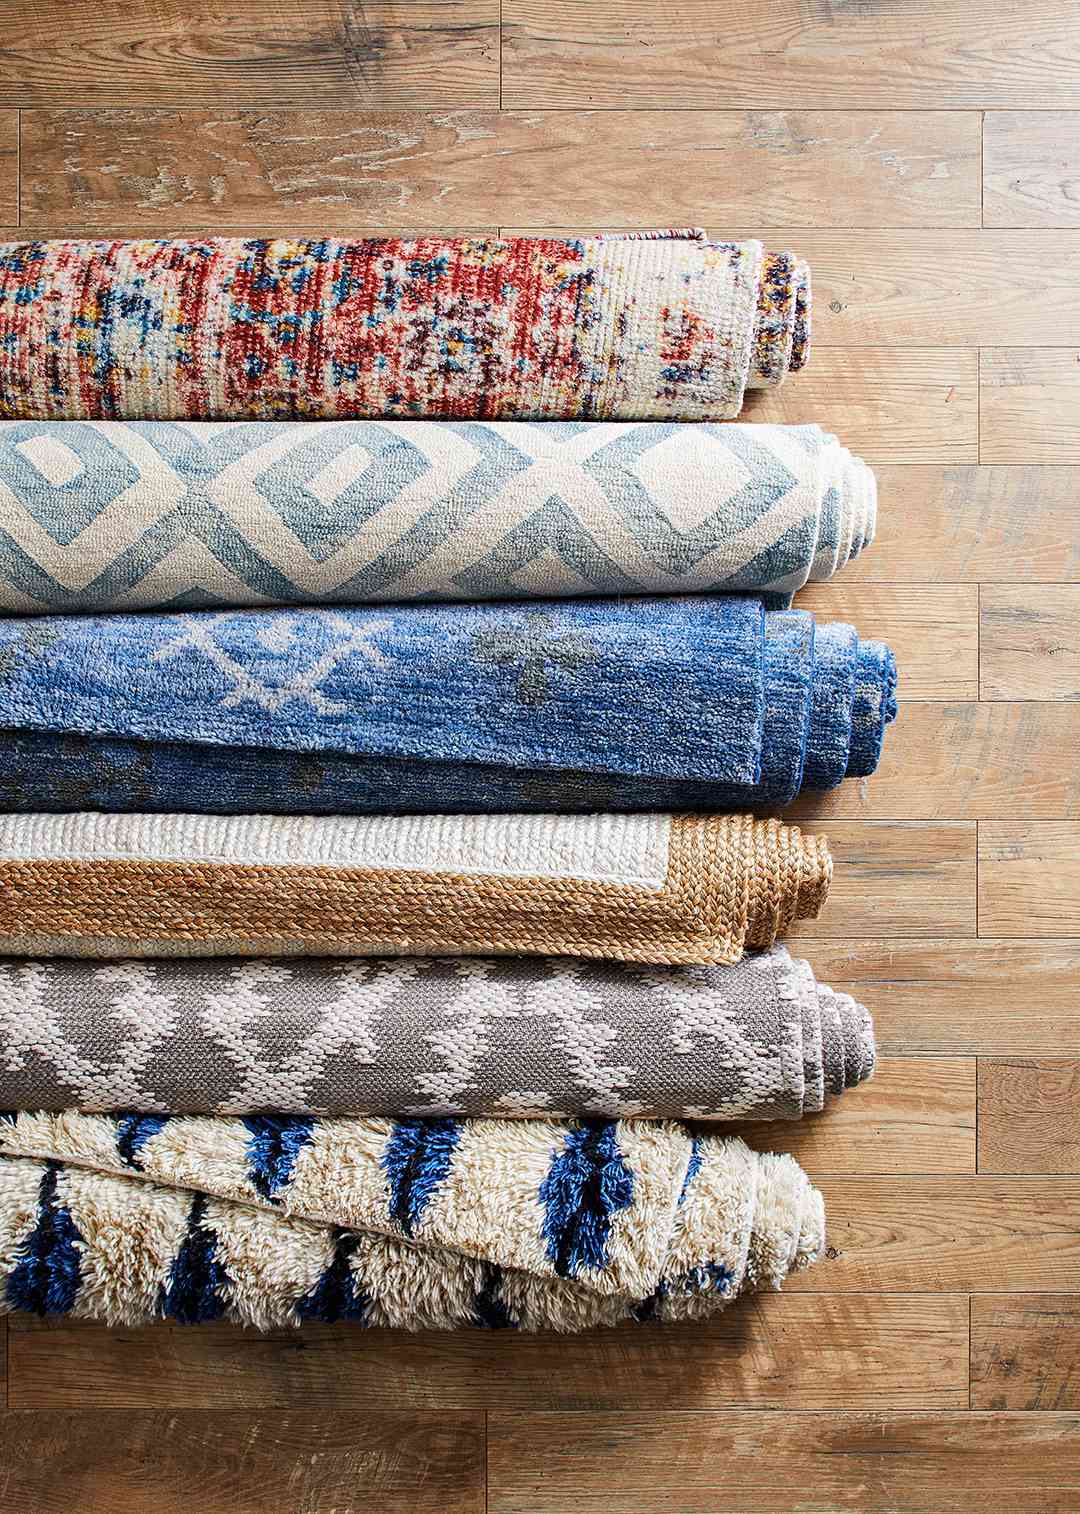 patterned blue, brown, and red rugs rolled on wooden floor